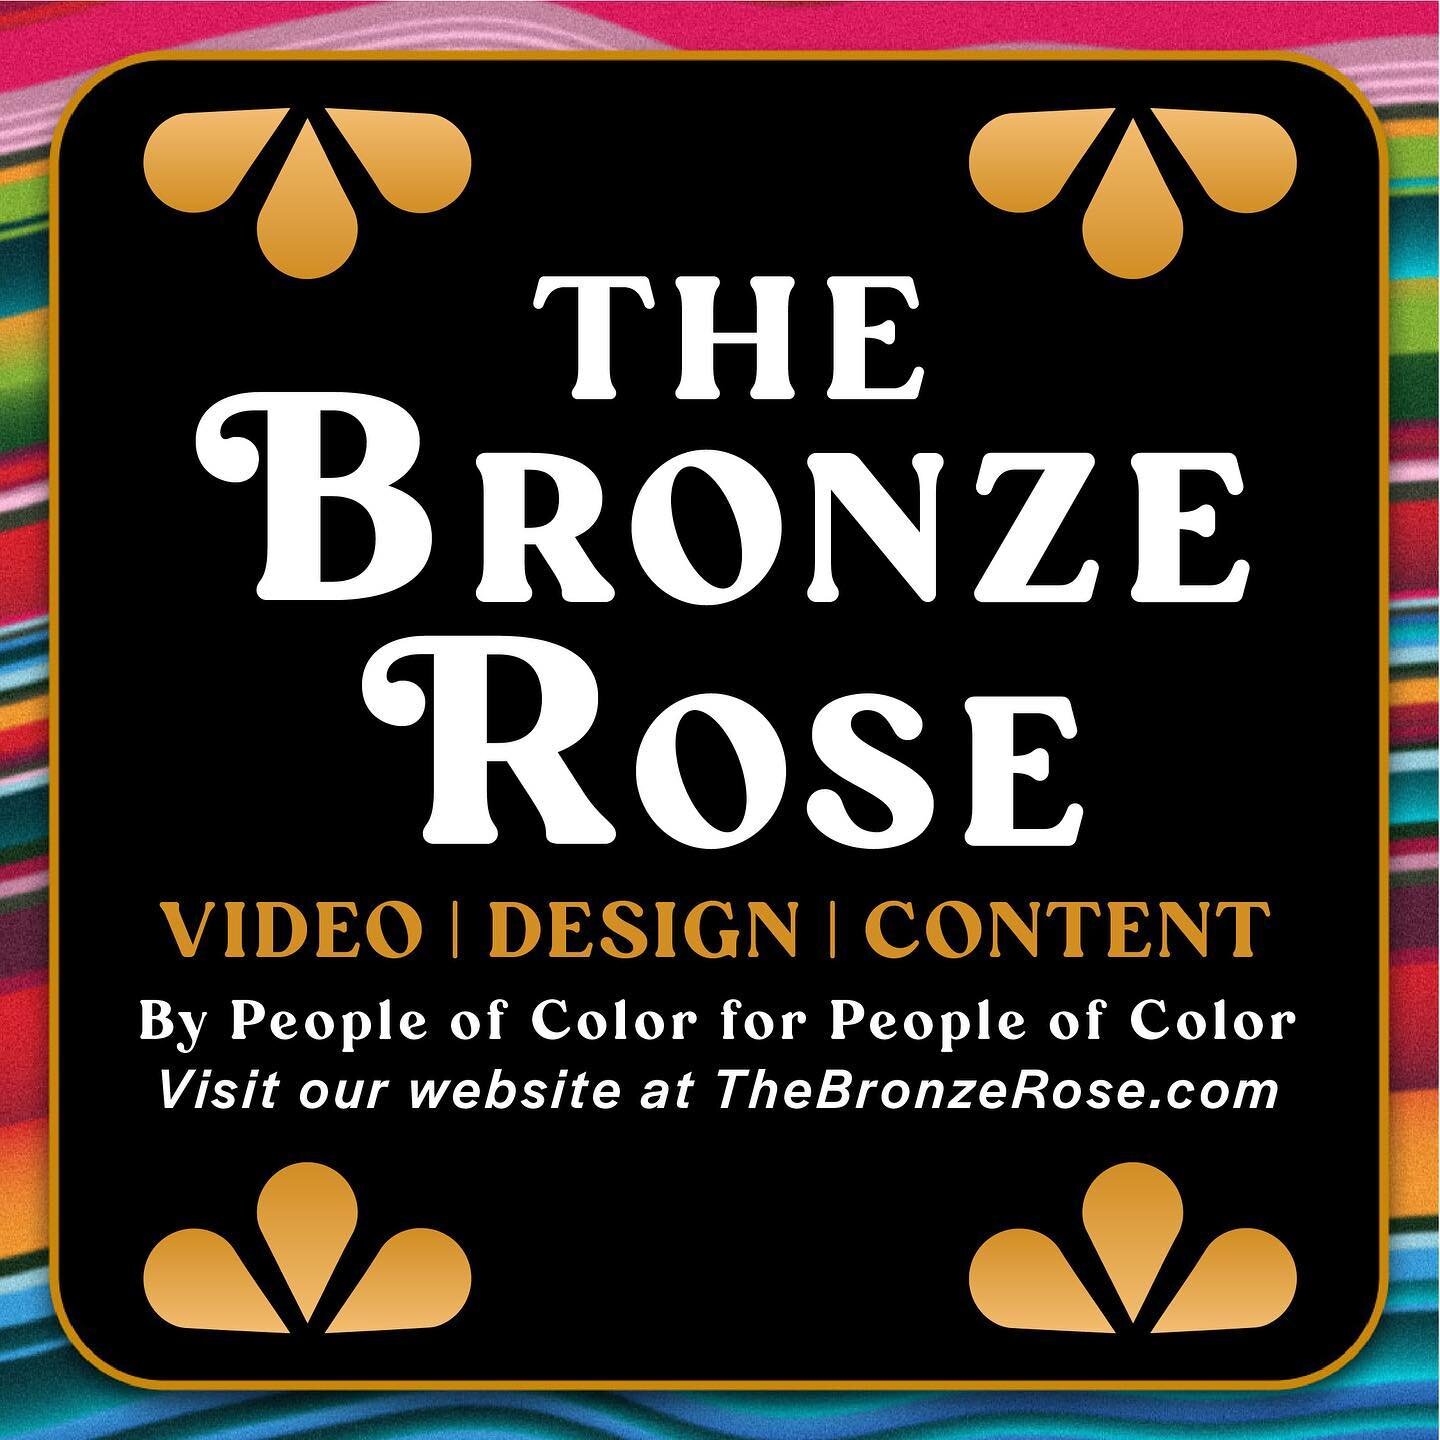 Swipe right on this post to see what THE BRONZE ROSE 🤌🏻🌹can do for you and YOUR BUSINESS!

#thebronzerose #creativeagency #design #videoproduction #socialmedia #websitedesign #smallbusiness #smallbusinesssupport